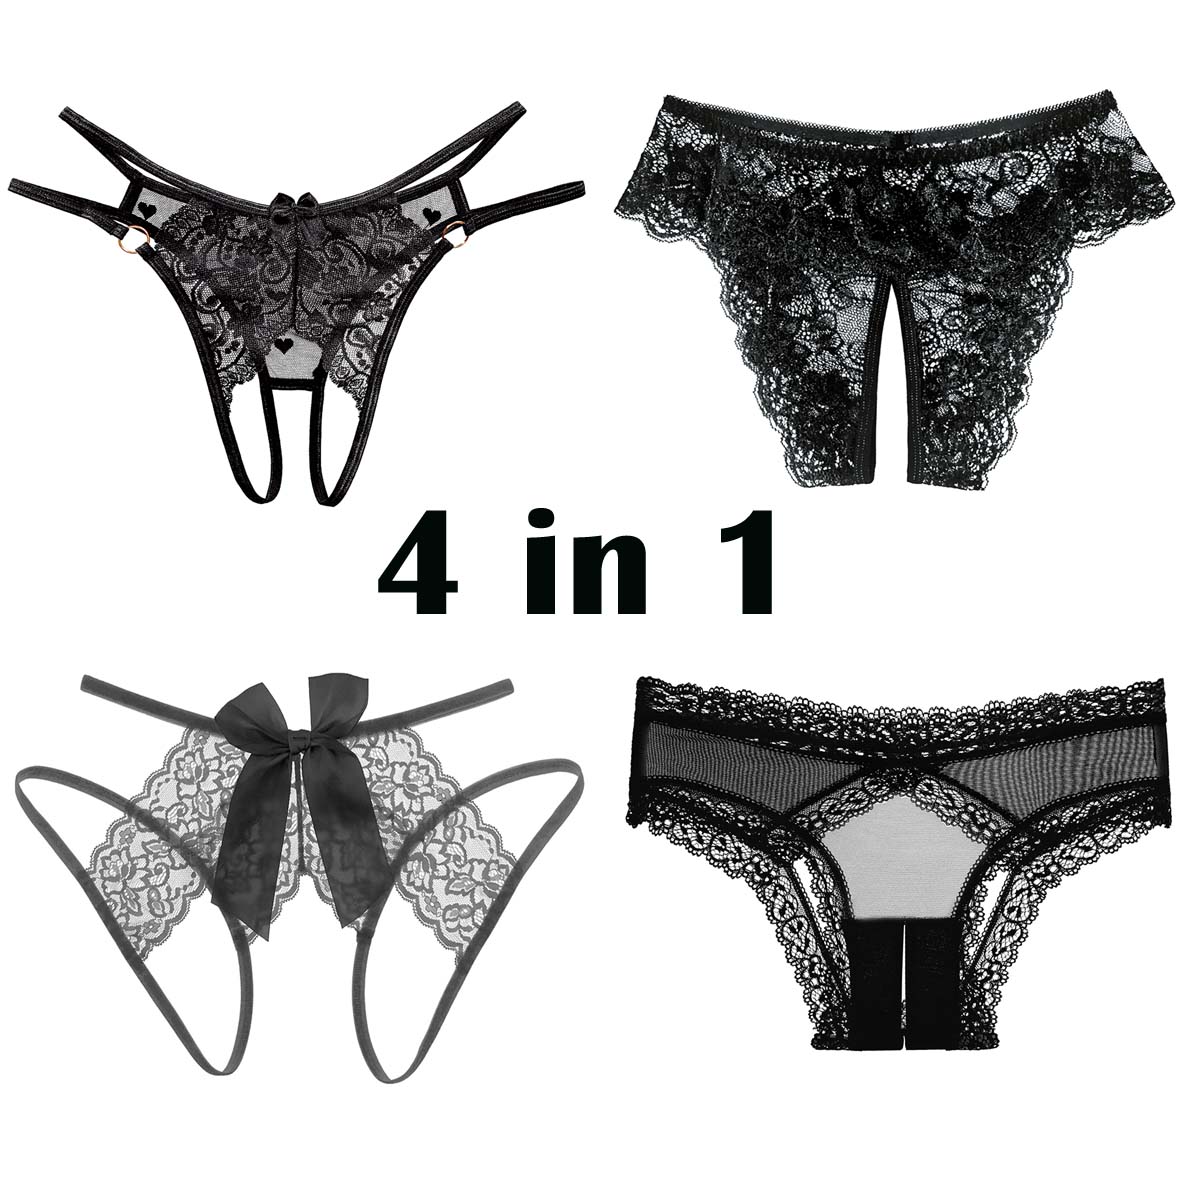 Women's 4in1 Sexy Panties Black Collection Low Rise Crotchless Thong Lingerie Lace G-string Sleepwear Clothing Dresses Backless Knicker for Girlfriend Wife